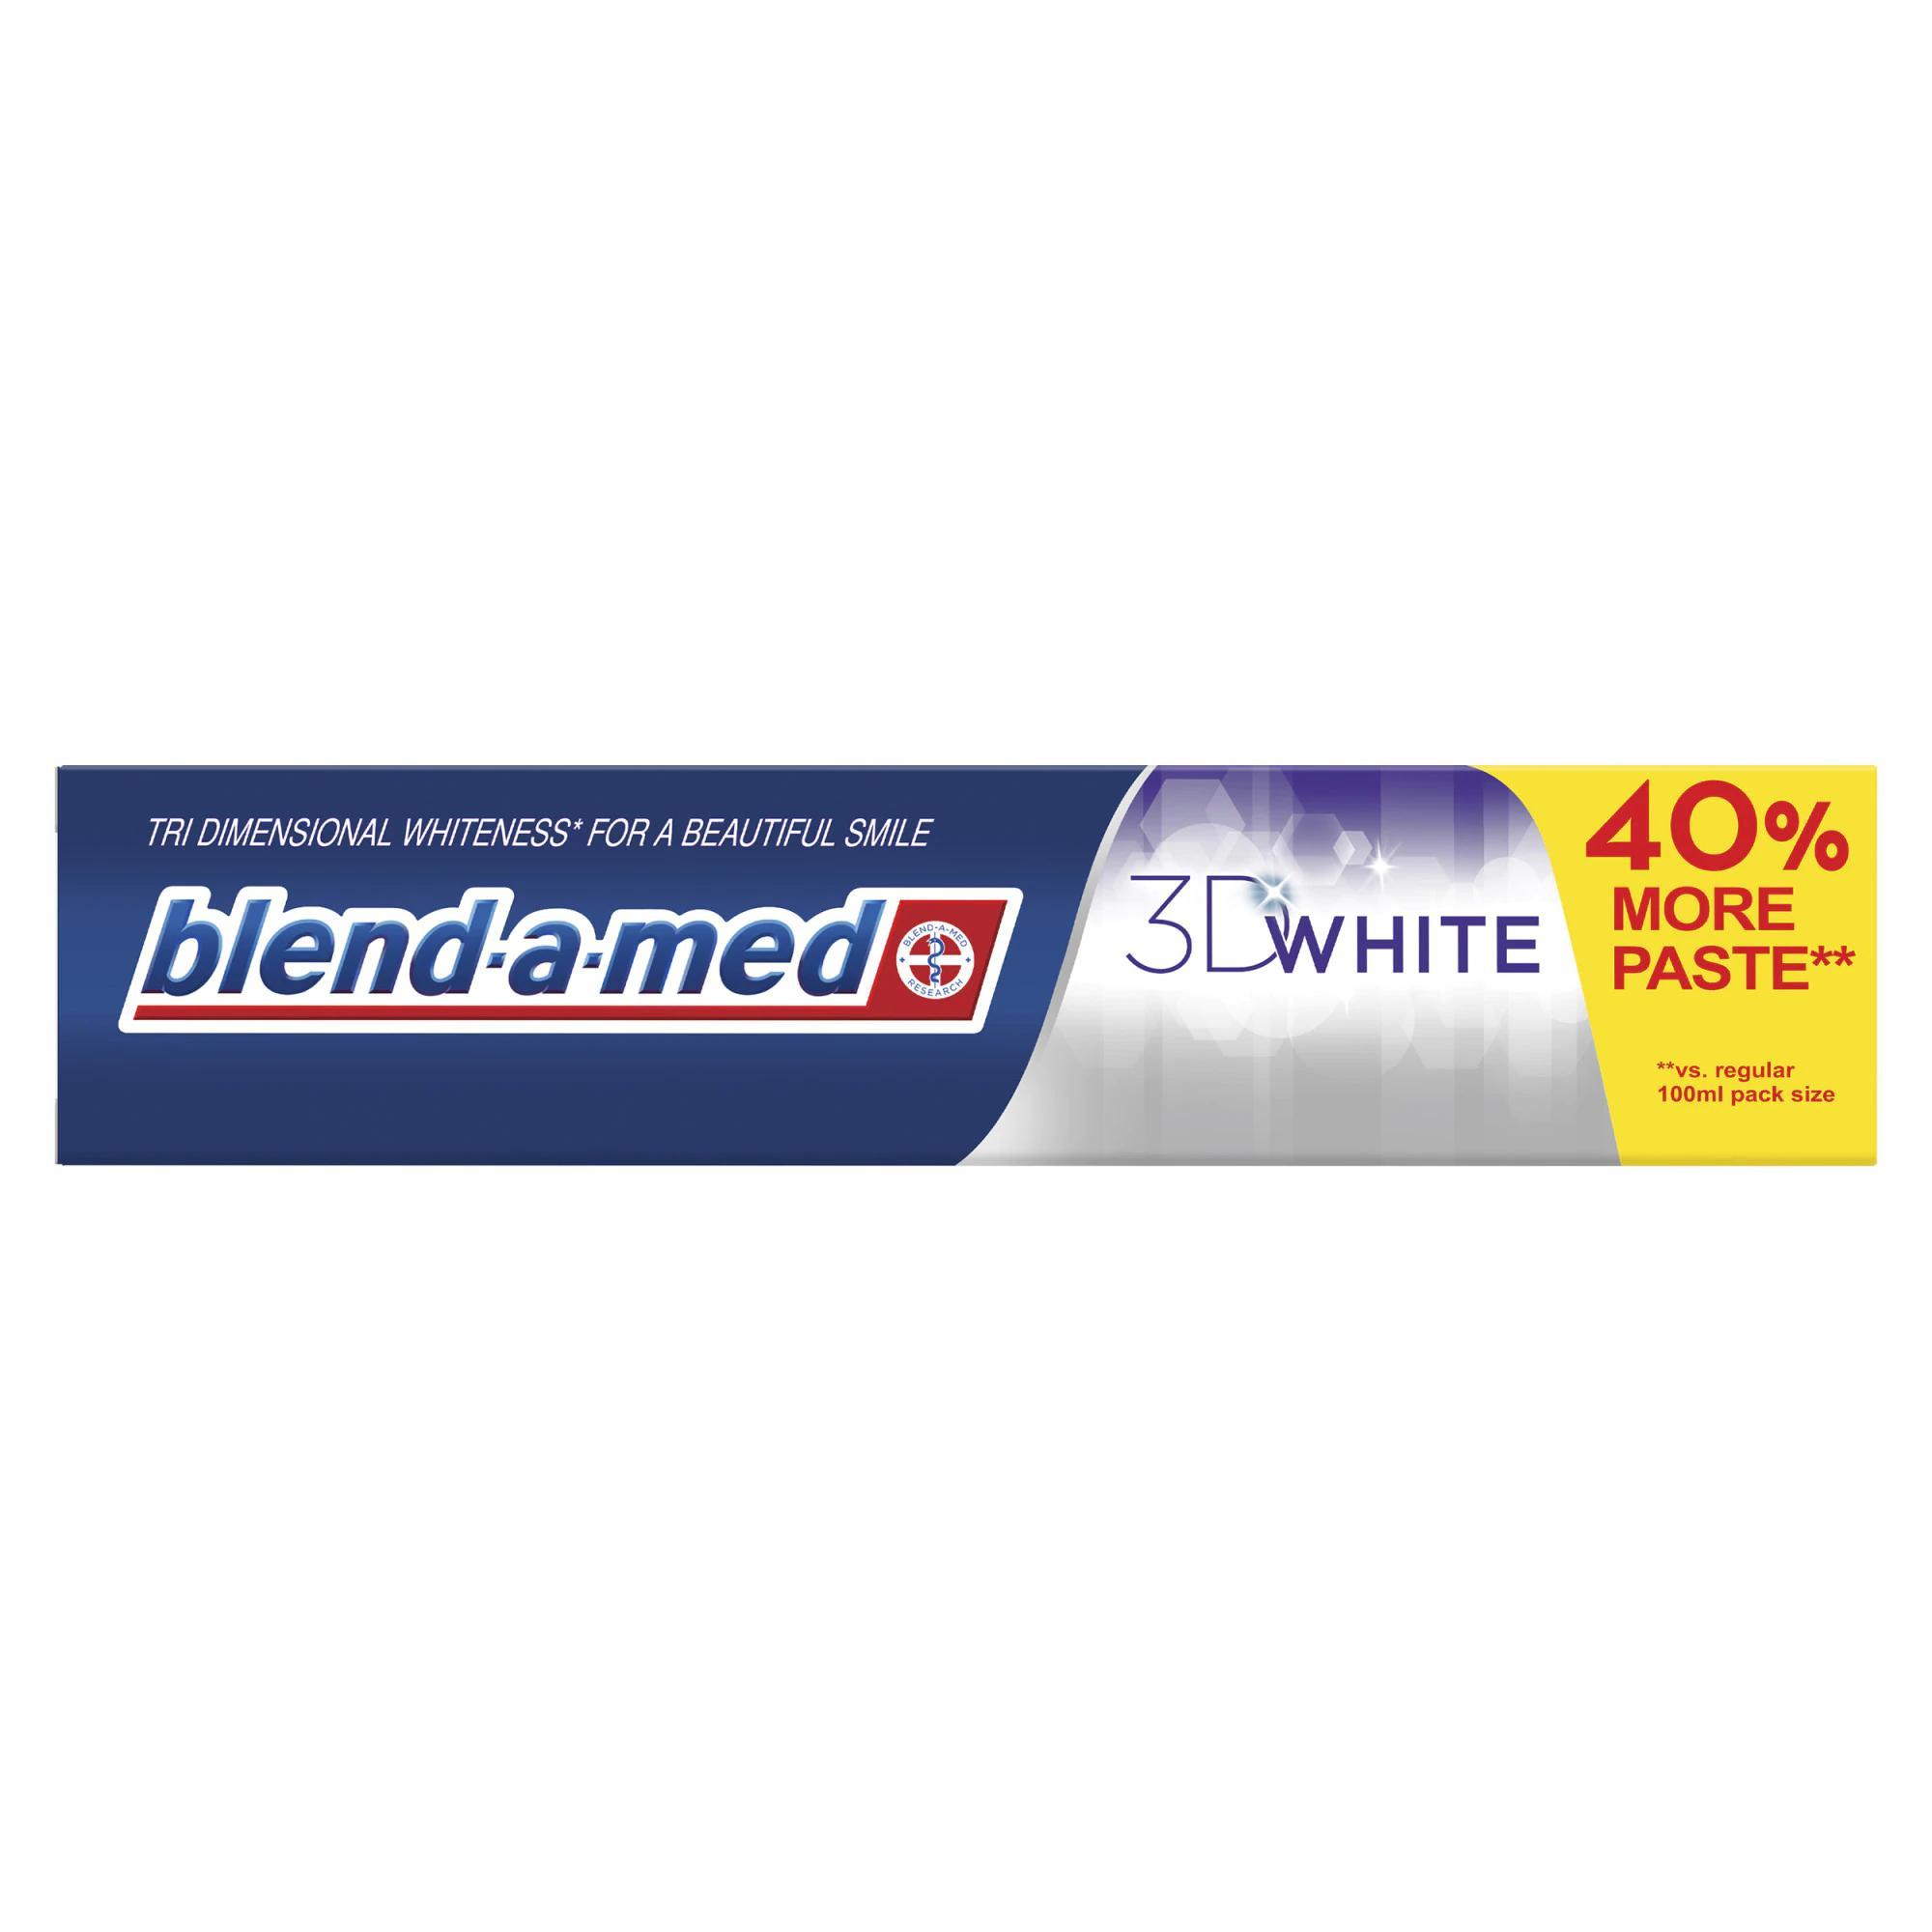 Blend-a-med 3D White Паста за зъби